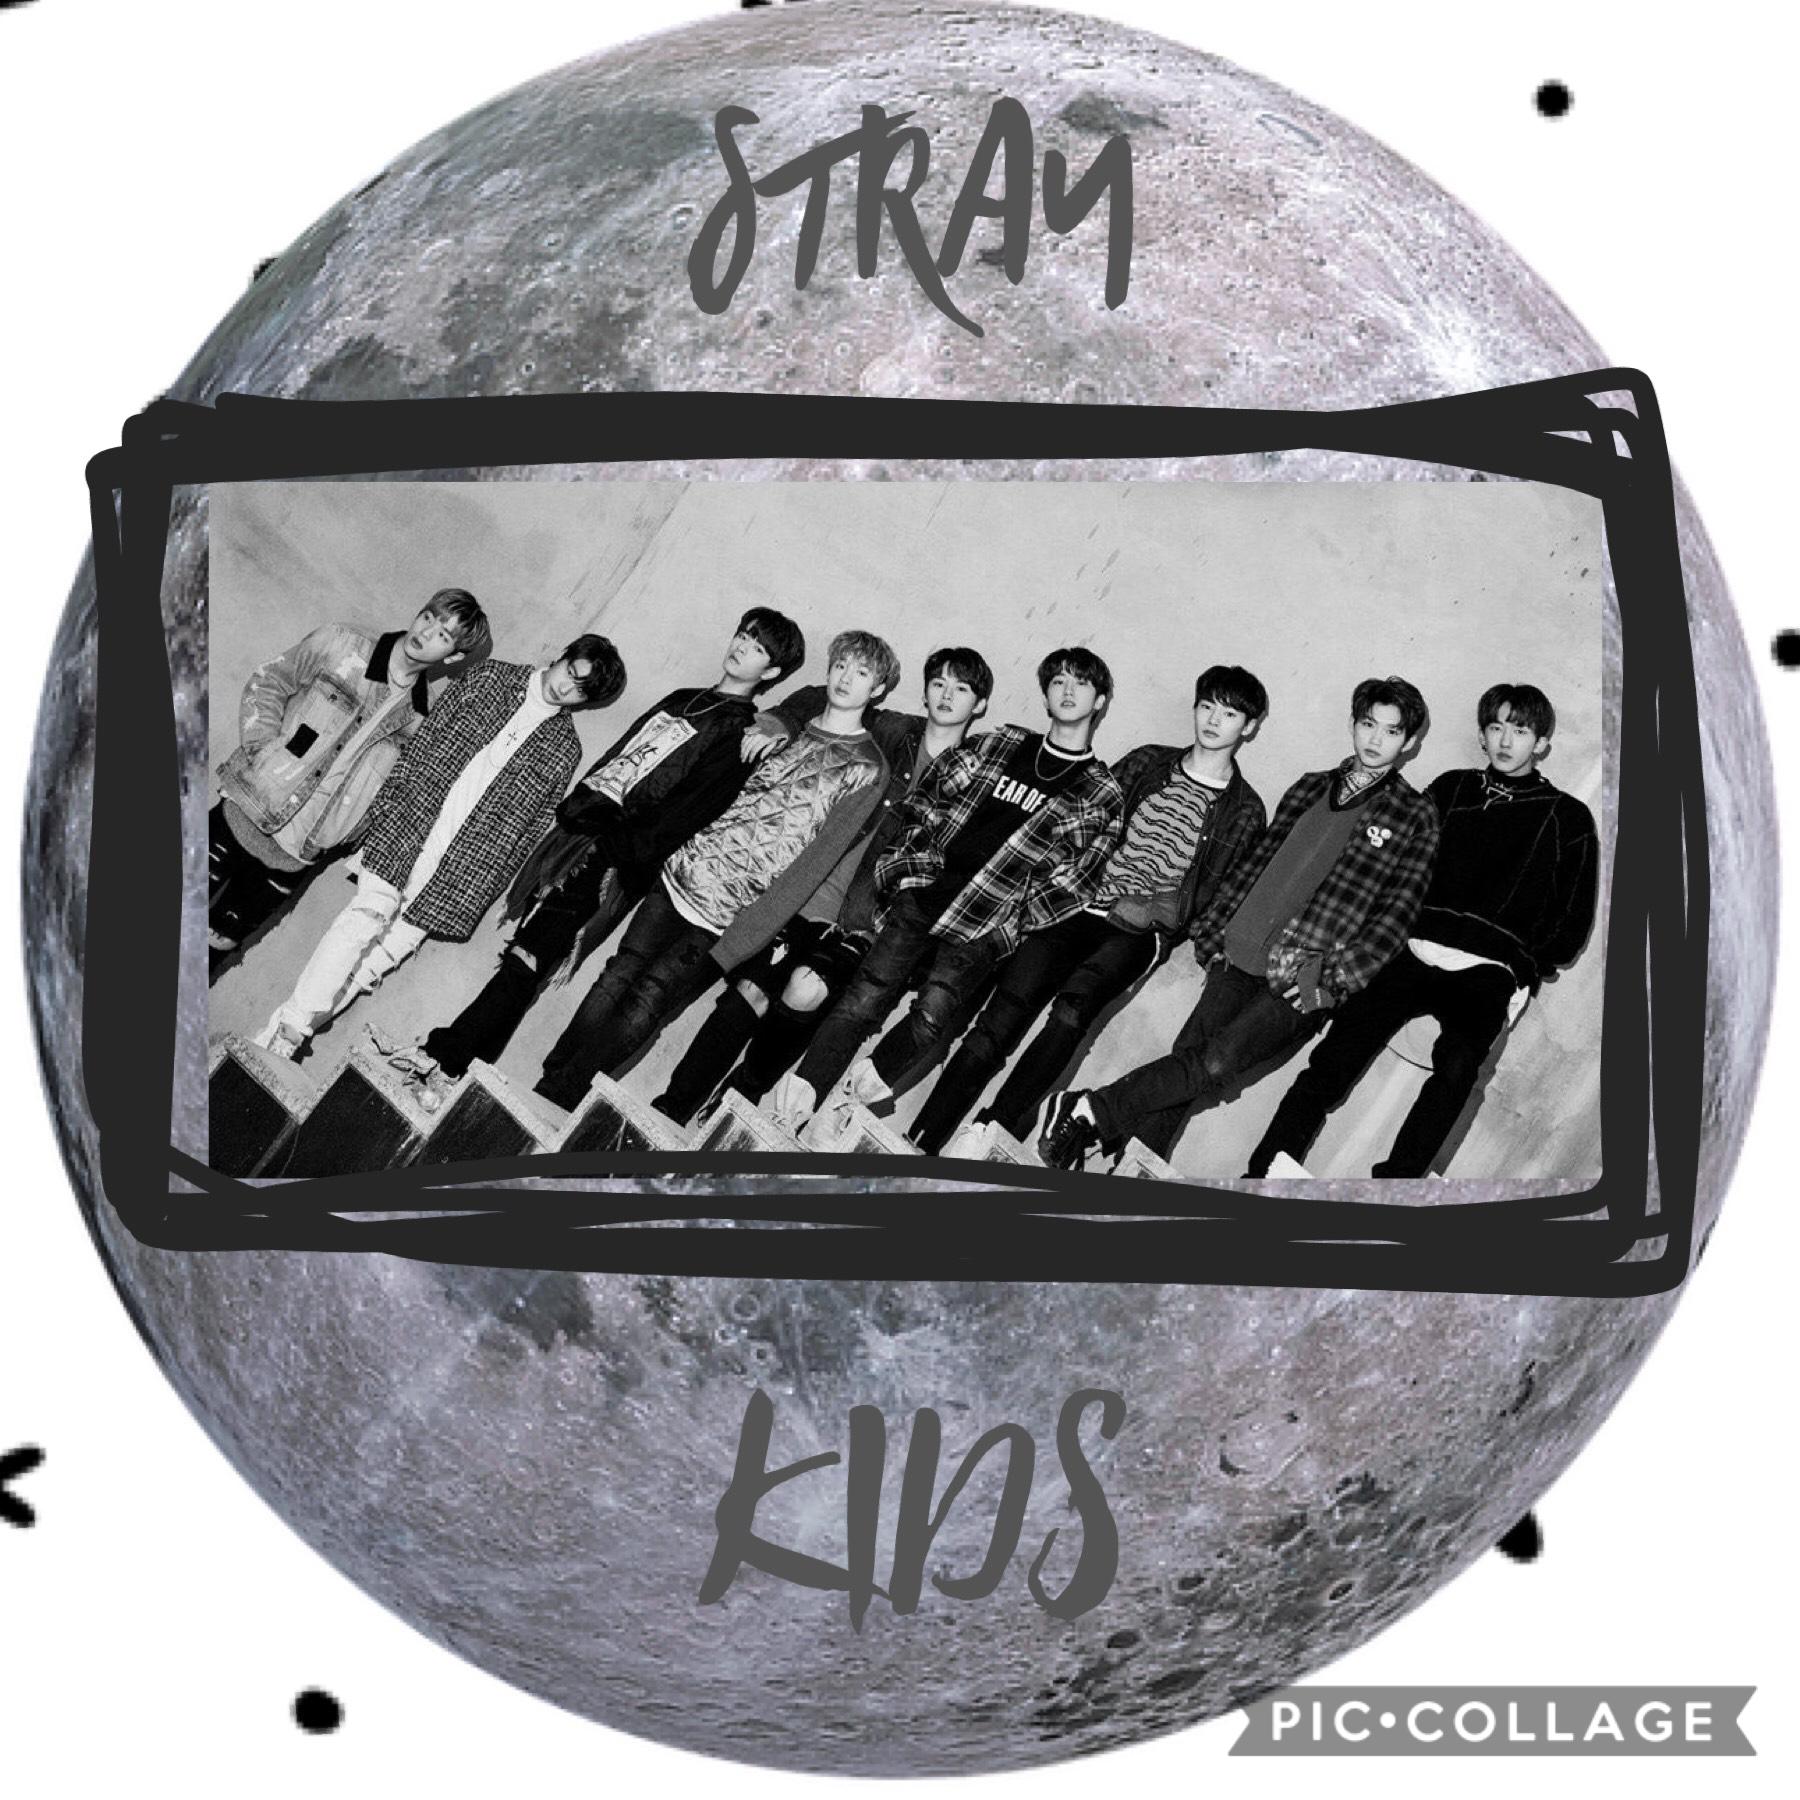 🖤 It’s not that good but whatever, listen to Stray Kids 🖤